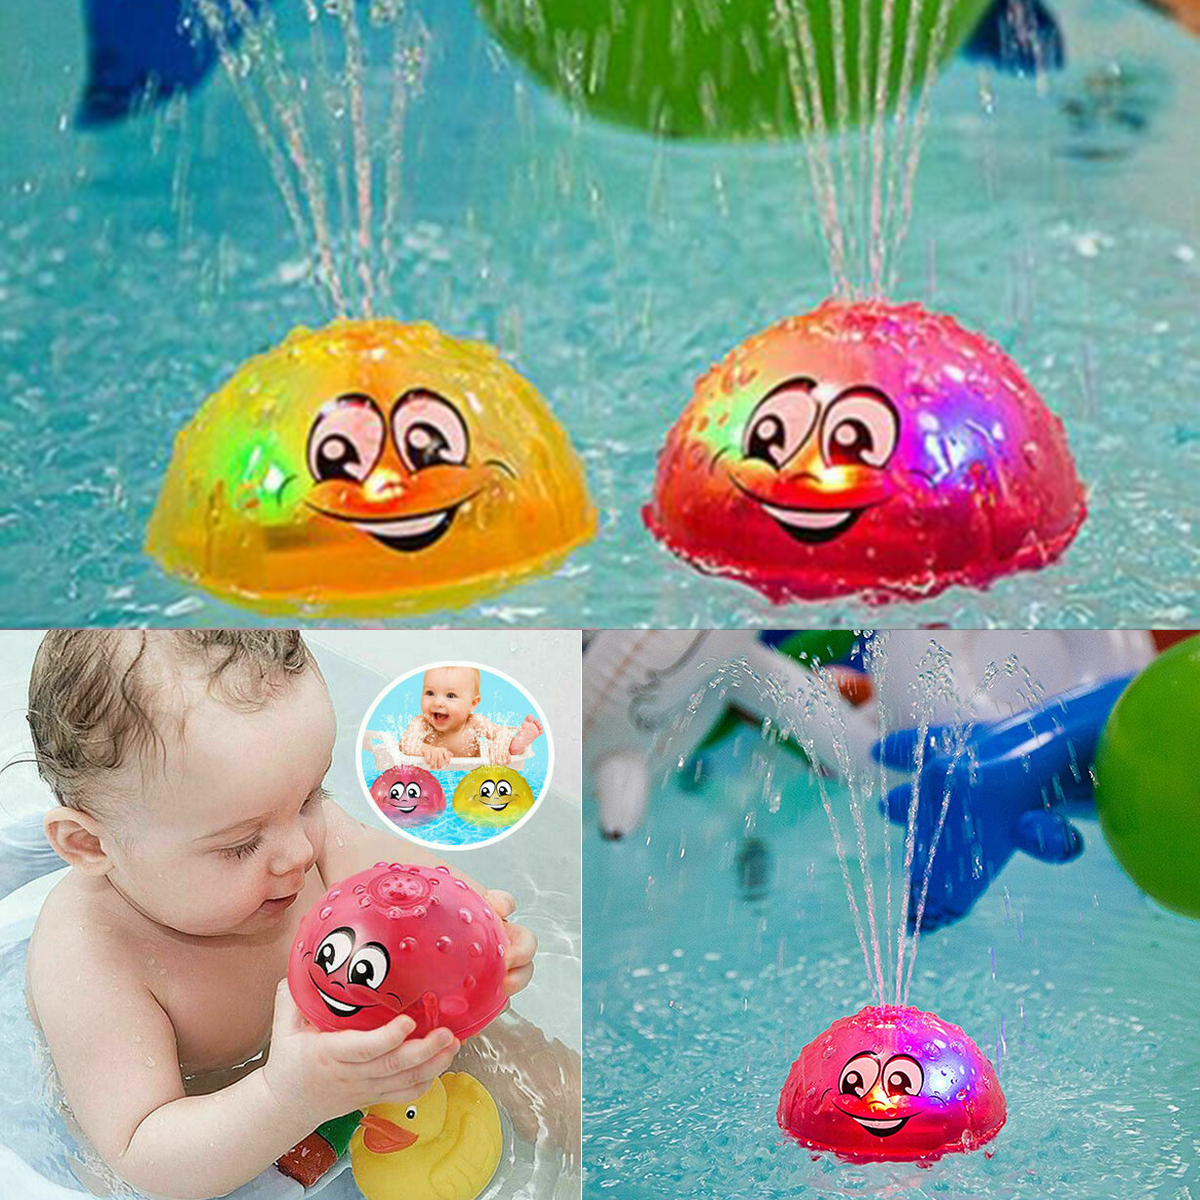 Infant-Childrens-Electric-Induction-Water-Spray-Toy-Bath-Light-Music-Rotate-Toy-1800447-3